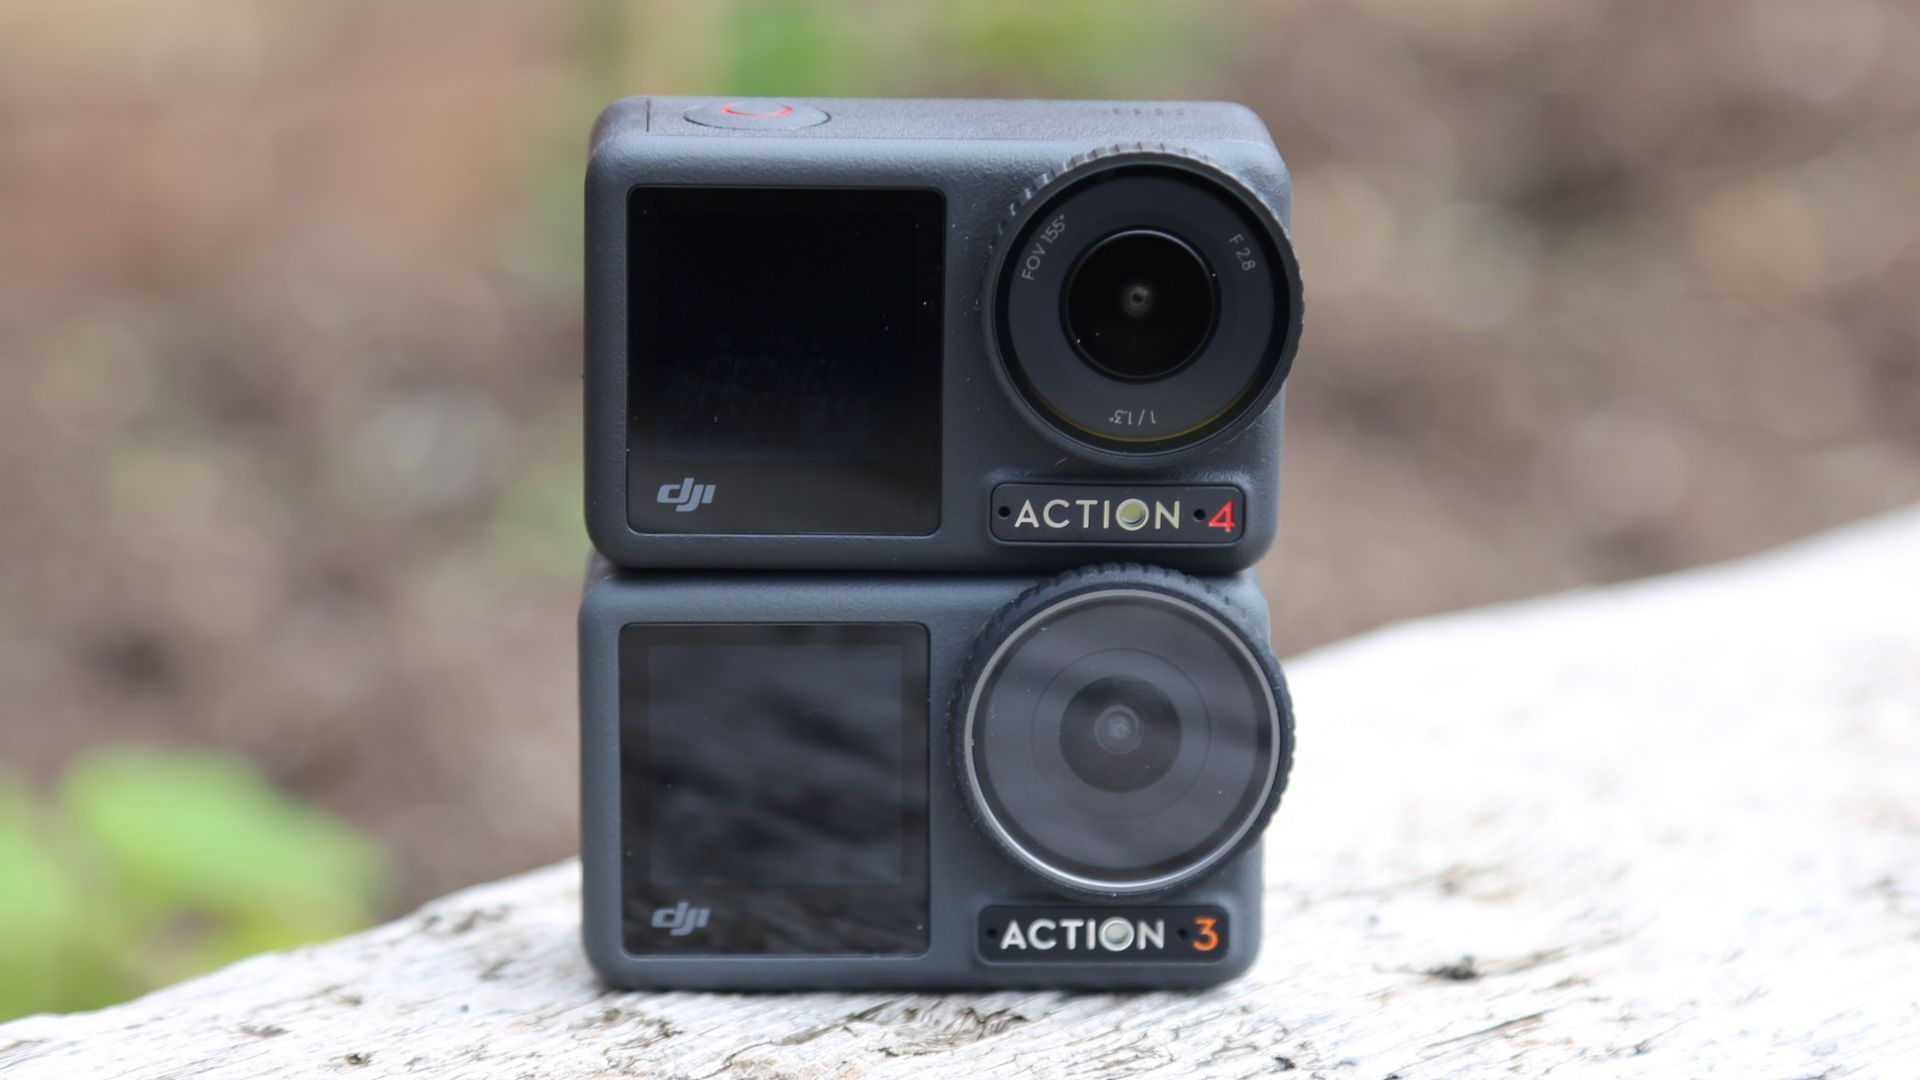 Which One Would You Pick? DJI Osmo Action 3 vs Action 2 